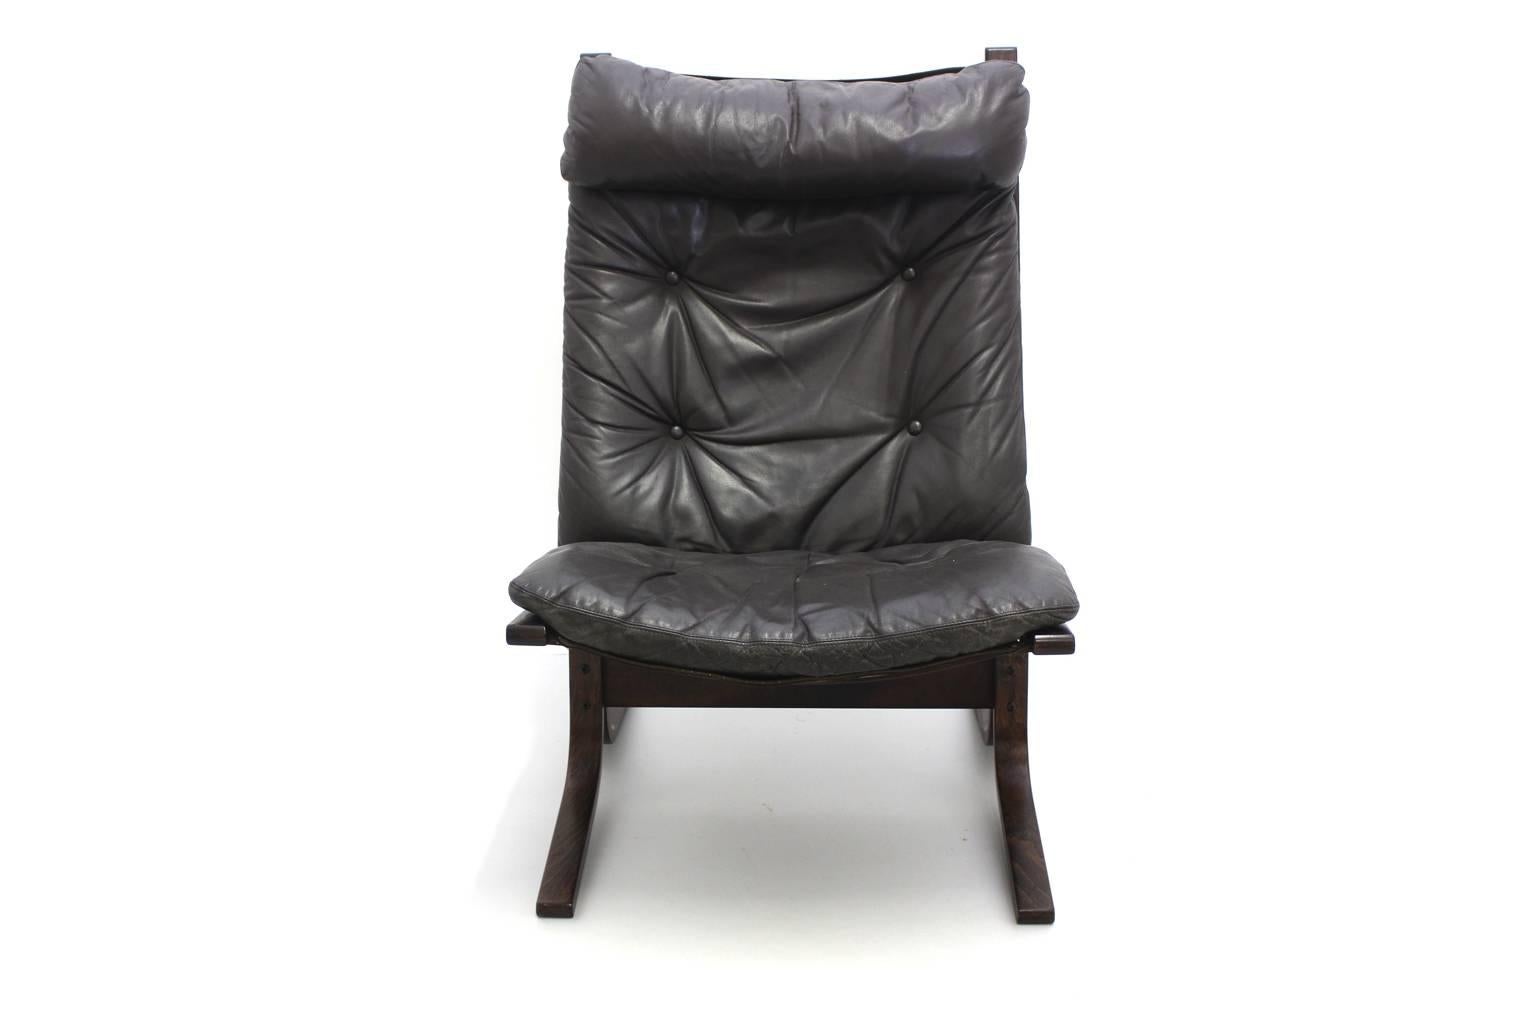 Scandinavian modern vintage lounge chair model Siesta designed by the Norwegian designer
Ingmar Relling (1920-2002) circa 1965 and produced by Westnofa Norway.

The frame of this lounge chair is made of brown bentwood and features brown leather